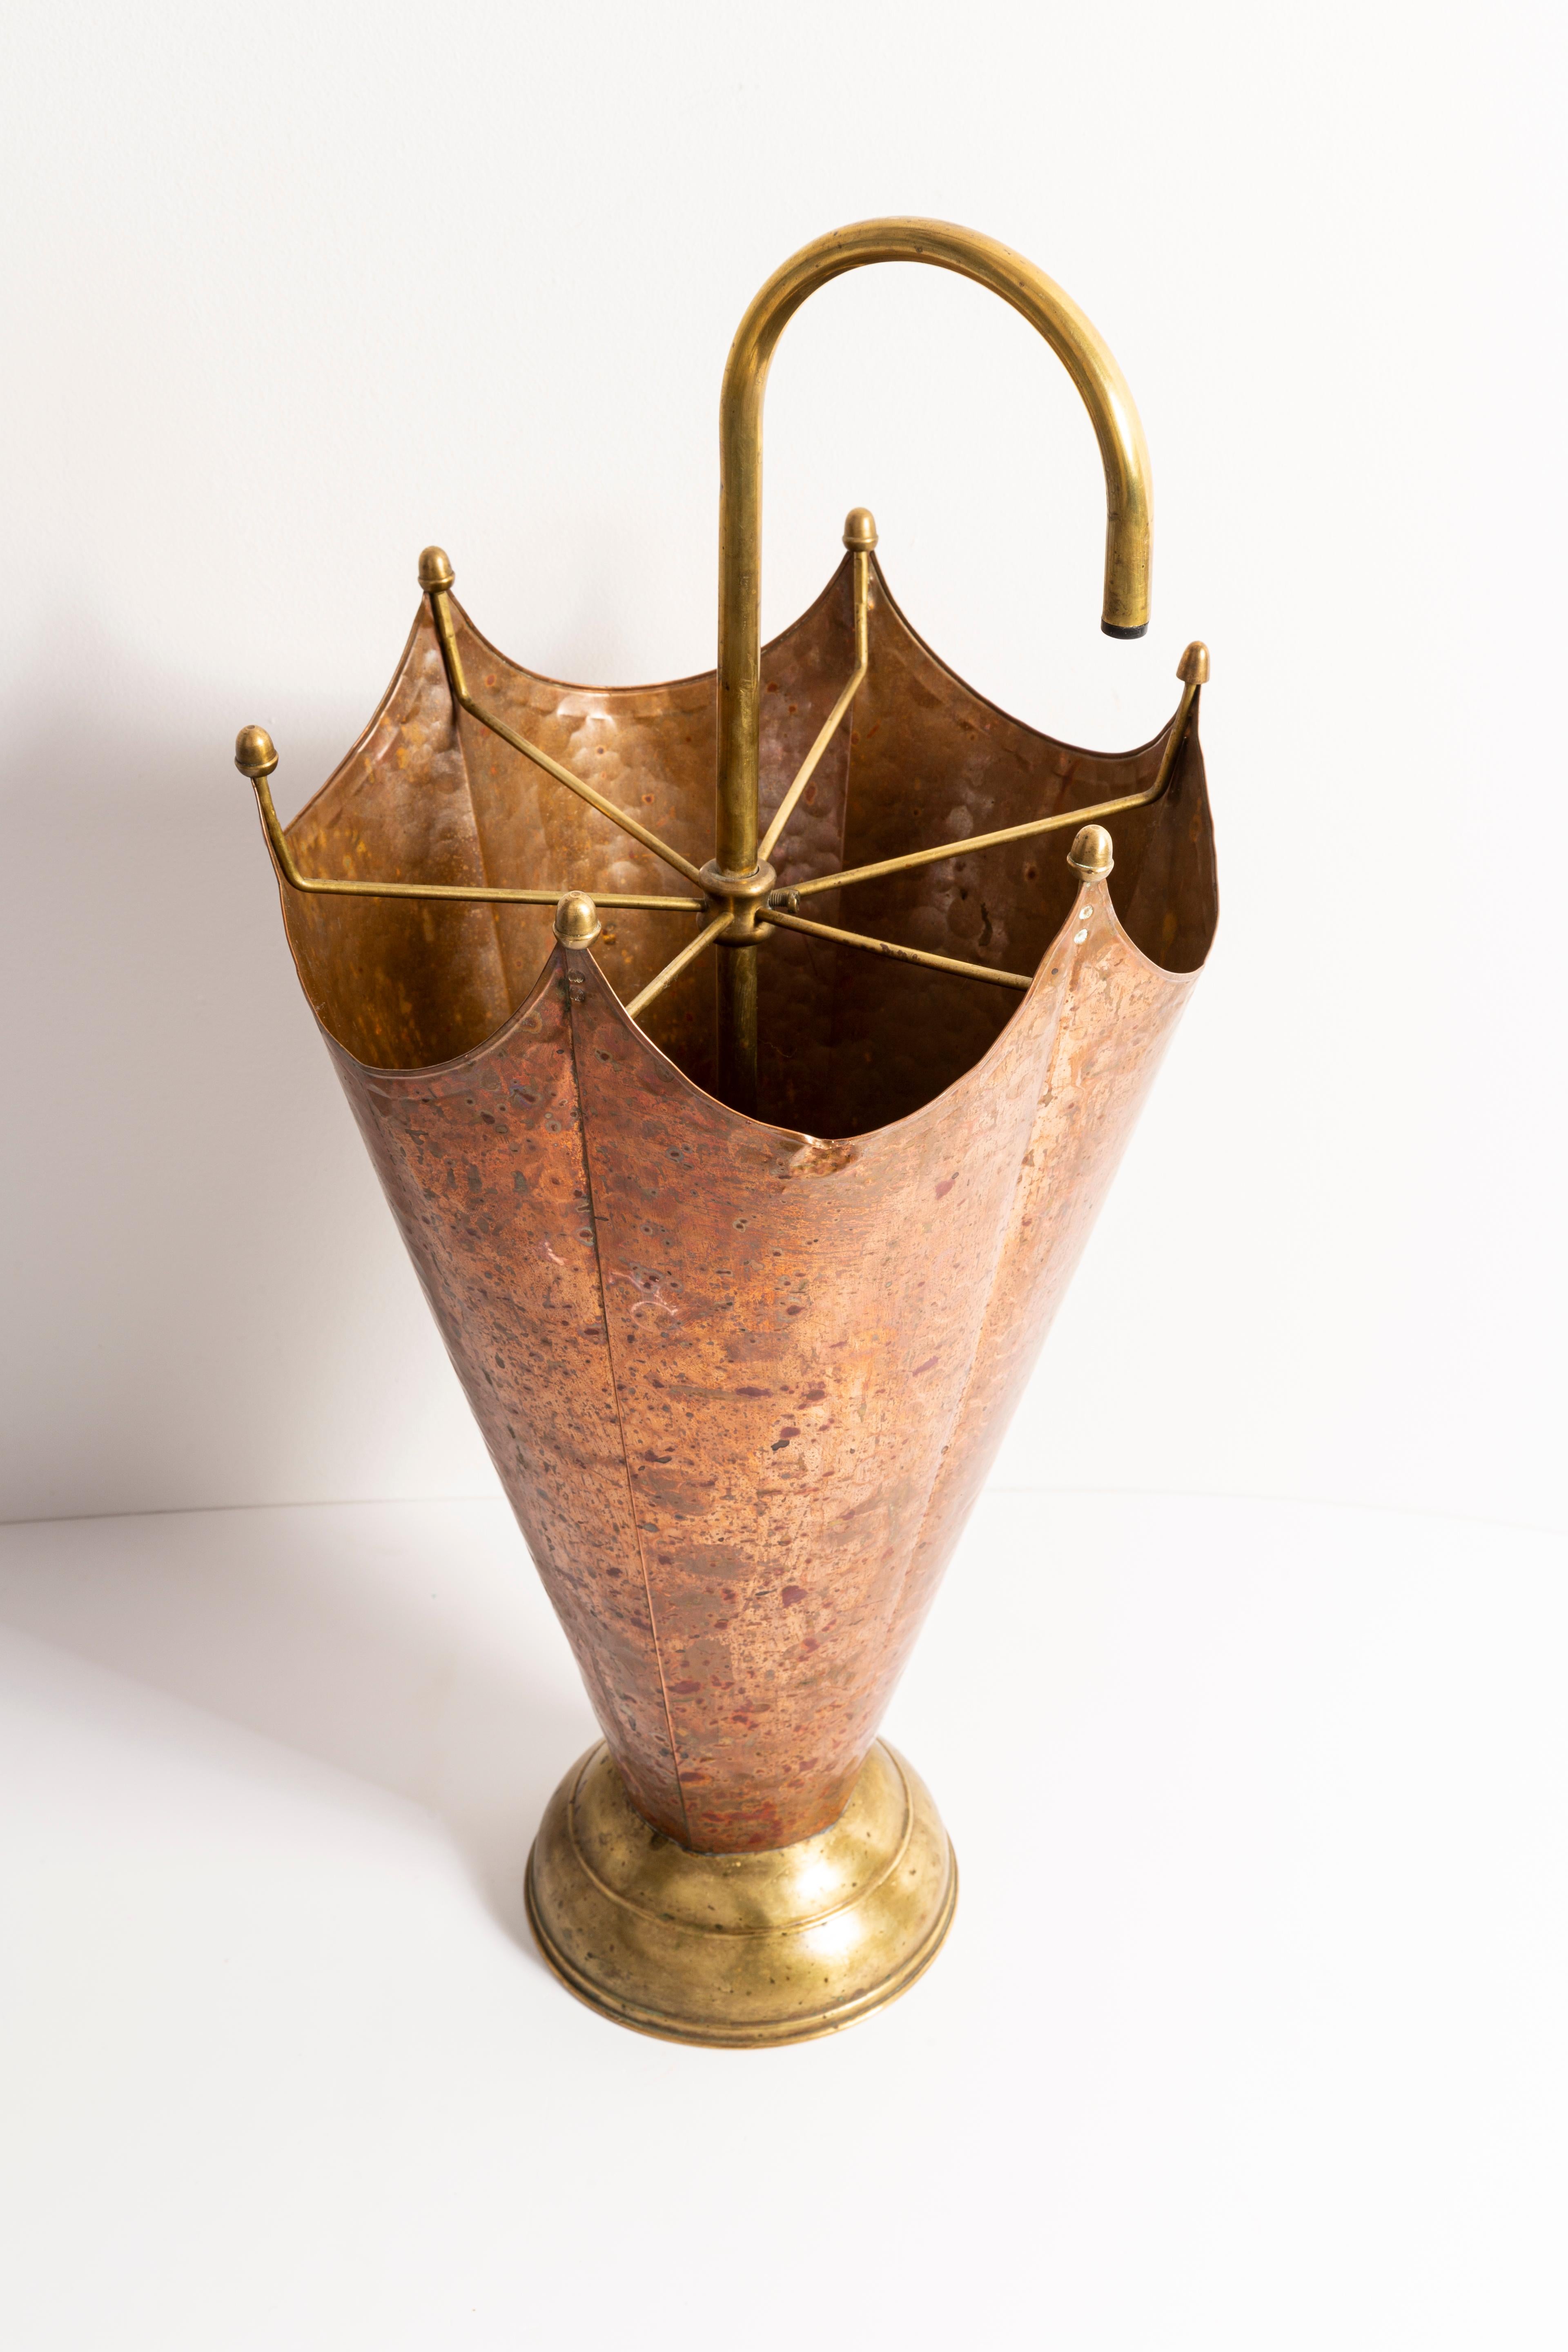 Stunning tall midcentury gold / gilt / gilded Hollywood Regency style umbrella stand / holder. Made in Florence, Italy, circa 1960. Very good original vintage condition. Only one unique piece.